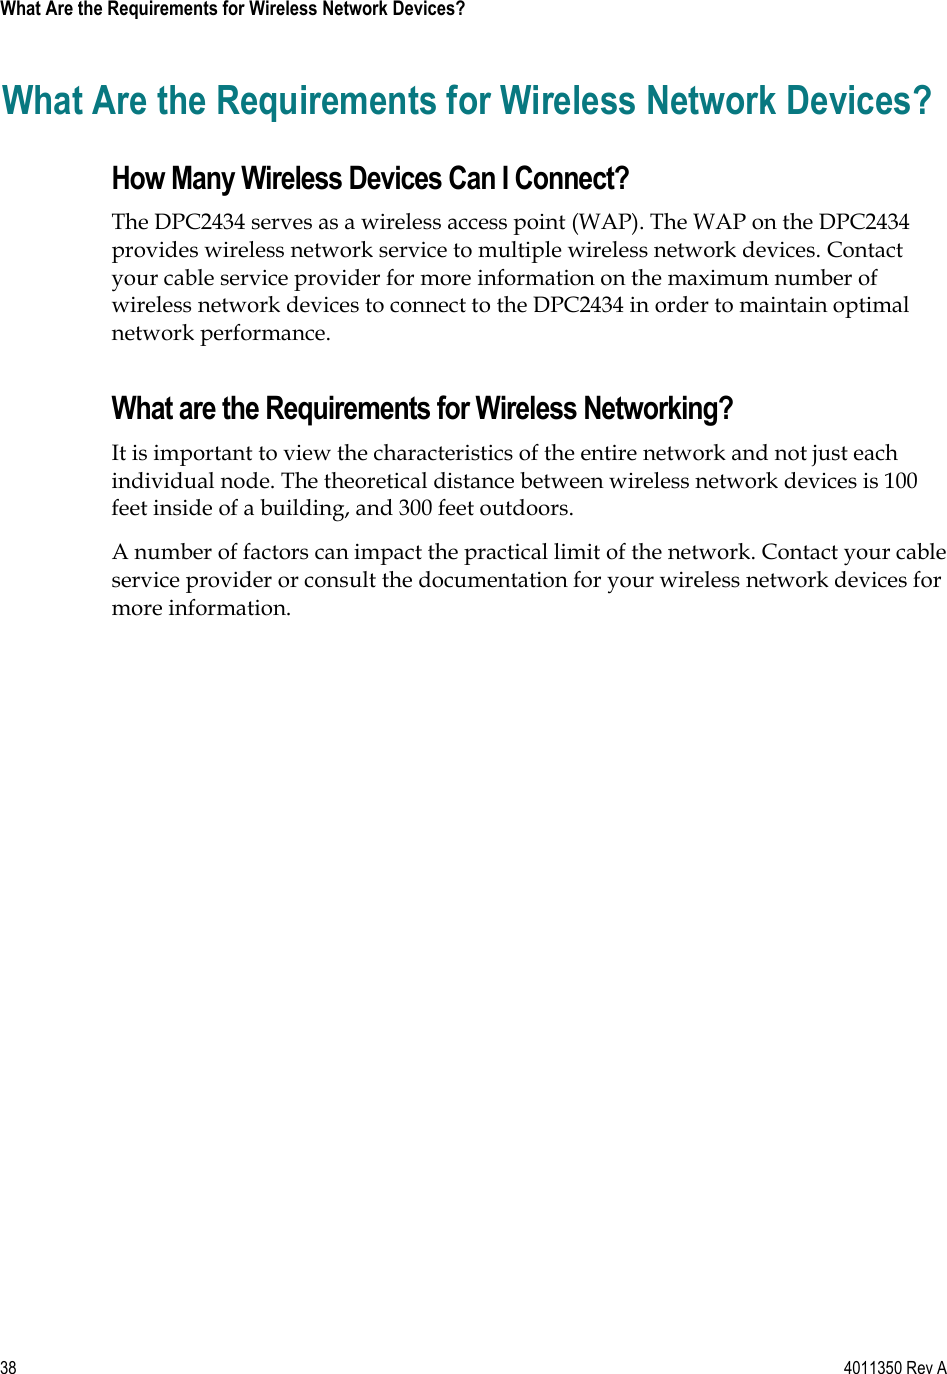 38    4011350 Rev A What Are the Requirements for Wireless Network Devices? What Are the Requirements for Wireless Network Devices? How Many Wireless Devices Can I Connect? The DPC2434 serves as a wireless access point (WAP). The WAP on the DPC2434 provides wireless network service to multiple wireless network devices. Contact your cable service provider for more information on the maximum number of wireless network devices to connect to the DPC2434 in order to maintain optimal network performance. What are the Requirements for Wireless Networking? It is important to view the characteristics of the entire network and not just each individual node. The theoretical distance between wireless network devices is 100 feet inside of a building, and 300 feet outdoors. A number of factors can impact the practical limit of the network. Contact your cable service provider or consult the documentation for your wireless network devices for more information. 